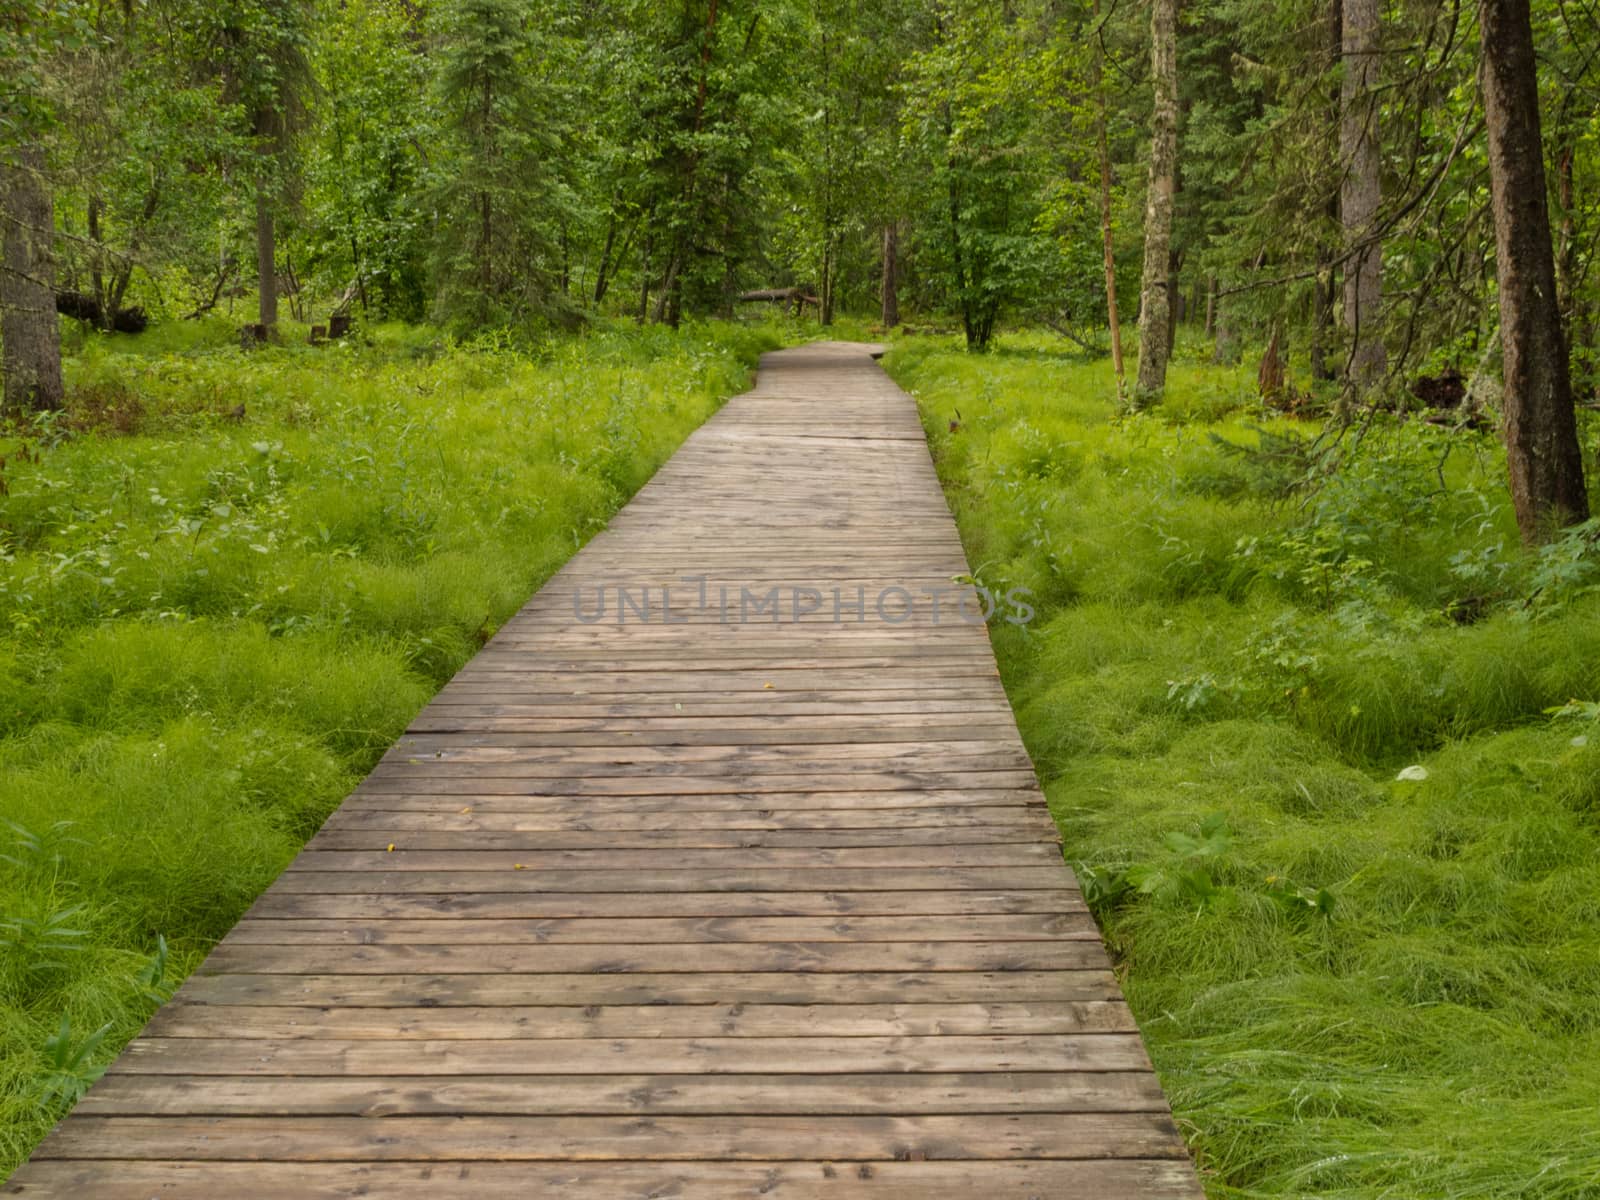 Boreal forest taiga boardwalk Northern BC Canada by PiLens